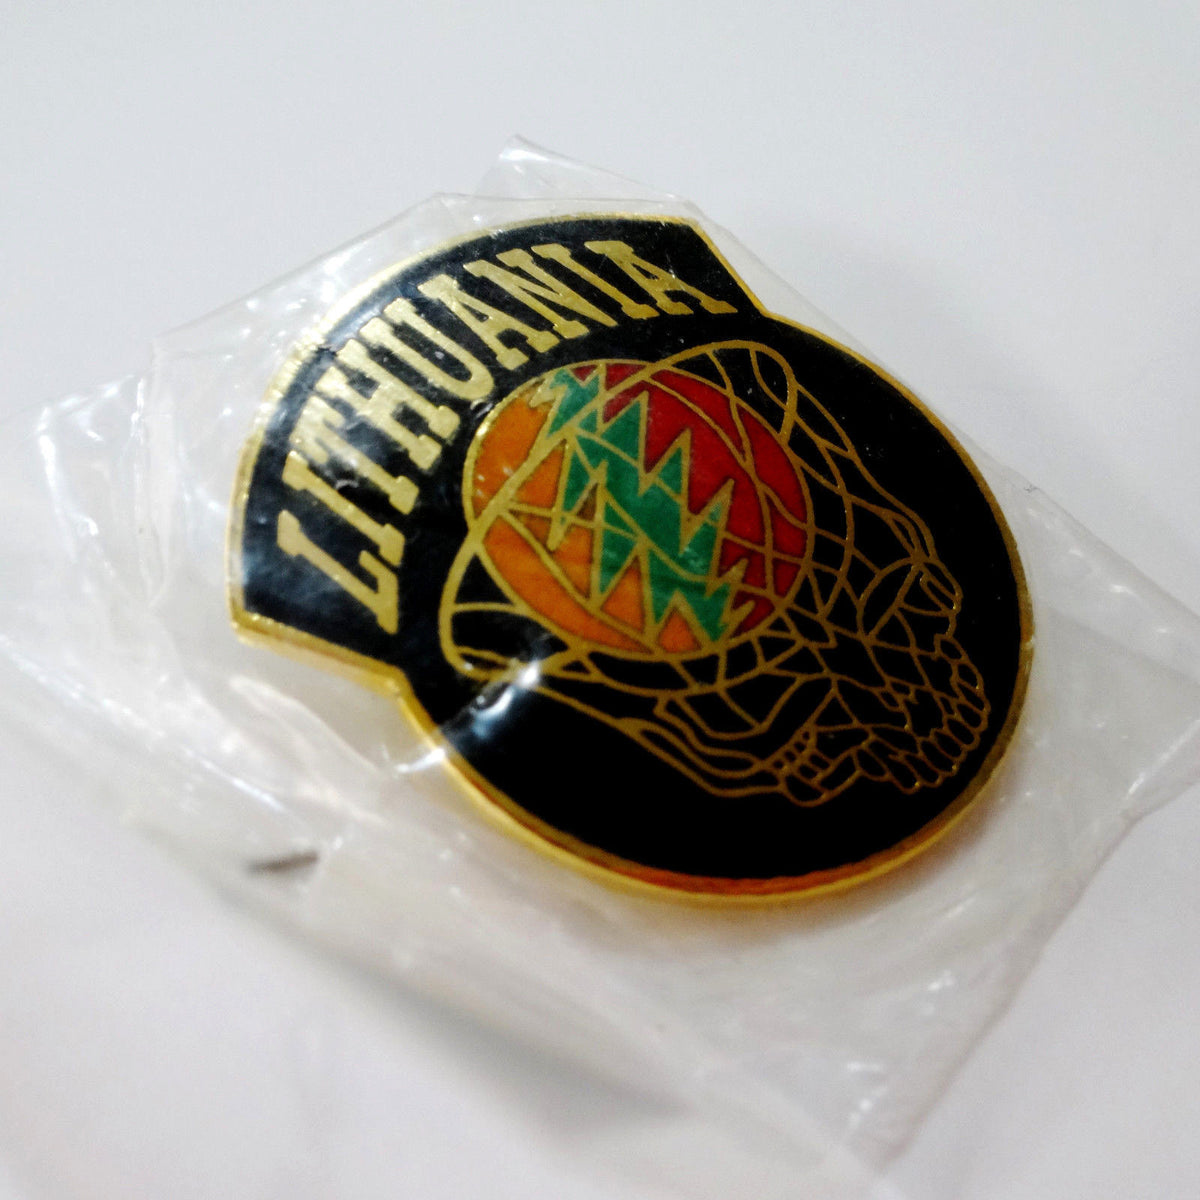 '96 Olympics Pin Lithuania Basketball Grateful Dead Inspired ...